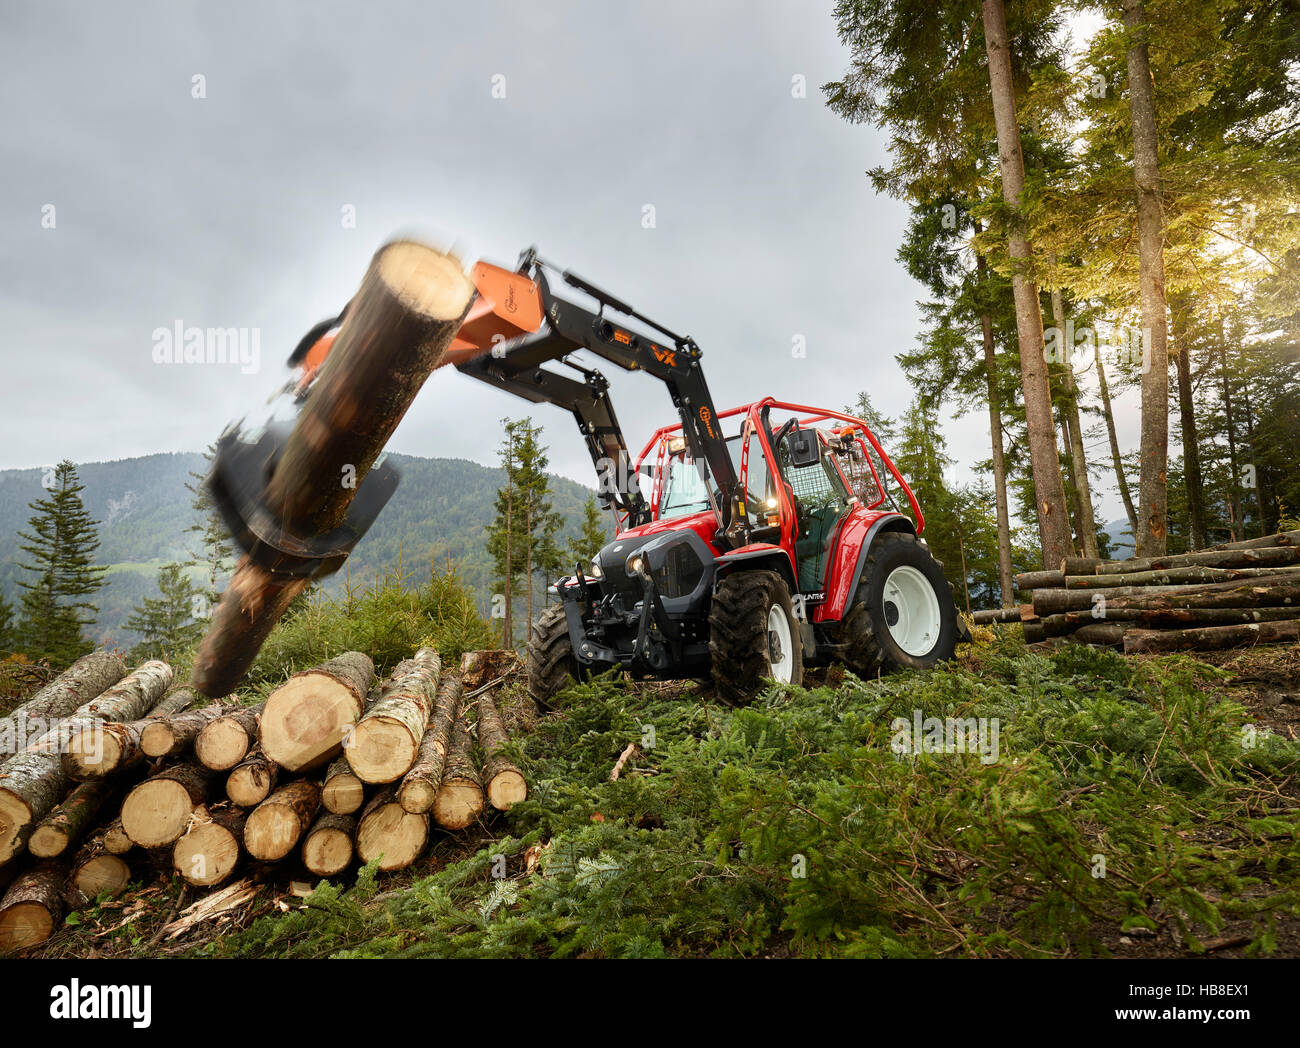 Forestry work, tractor moving tree trunk onto stack of wood, Lindner Traktor, Kundl, Tyrol, Austria Stock Photo